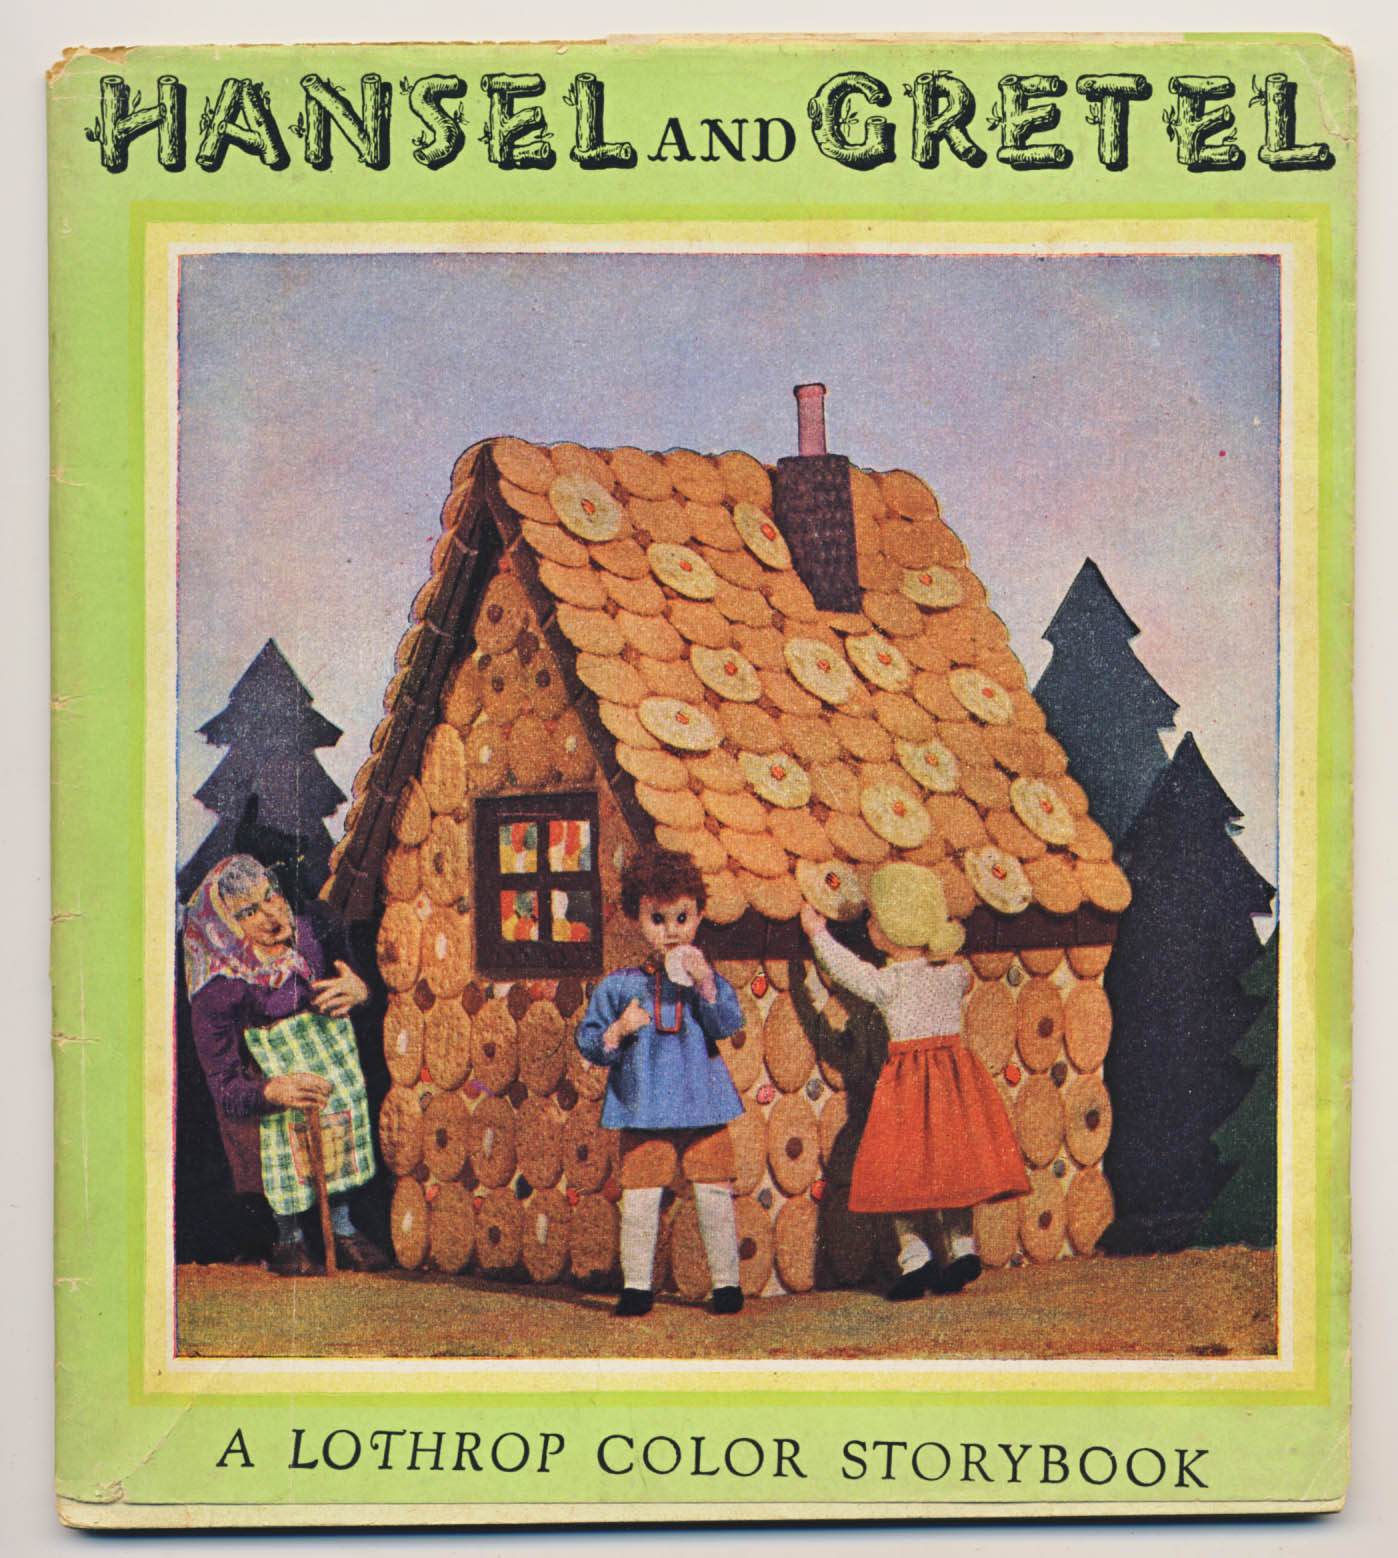 Sergio Ruzzier: The Story of Hansel and Gretel1398 x 1558